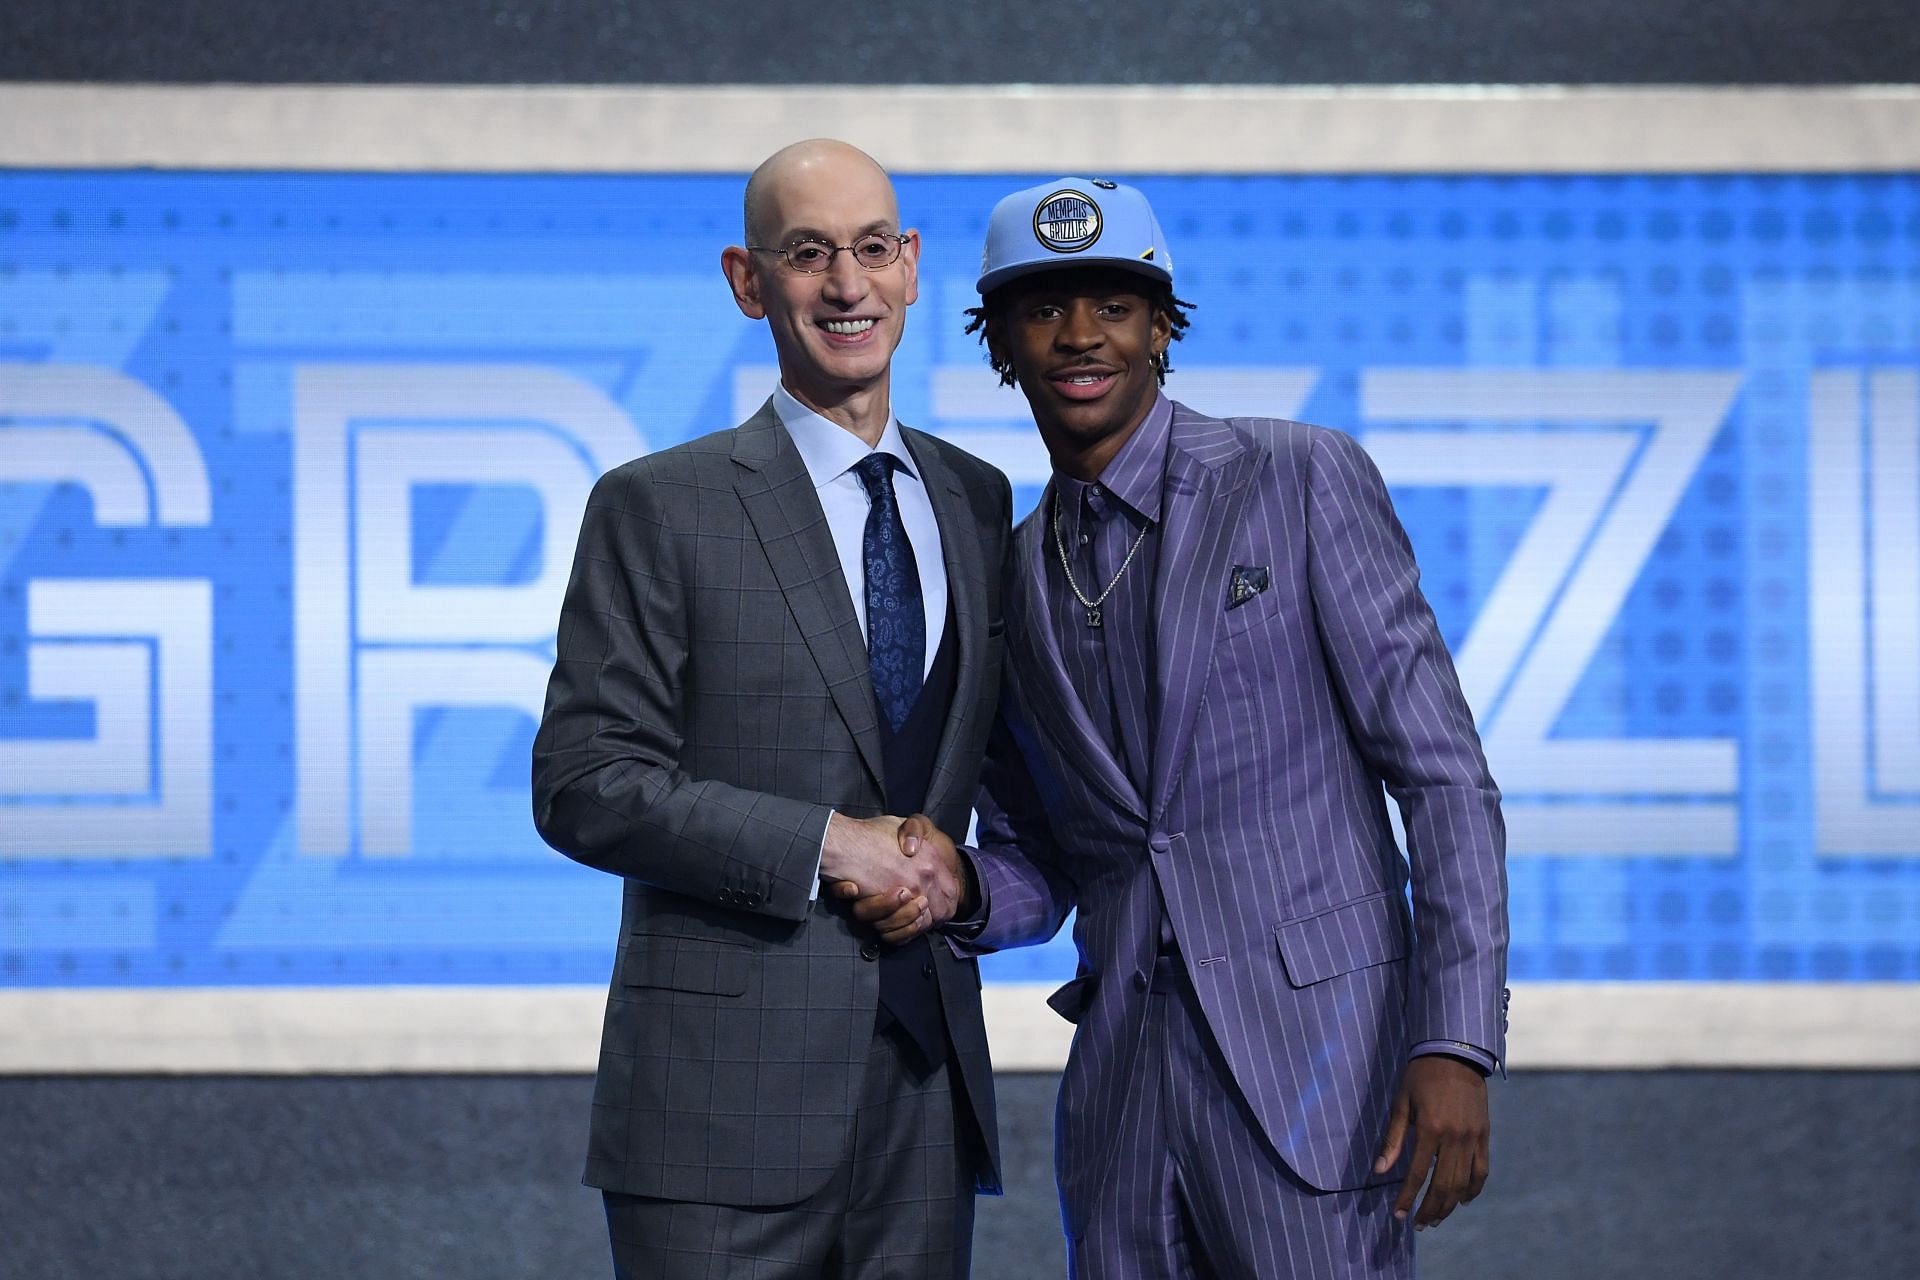 Ja Morant was the number two pick in the 2019 draft, which could have been the New York Knicks pick